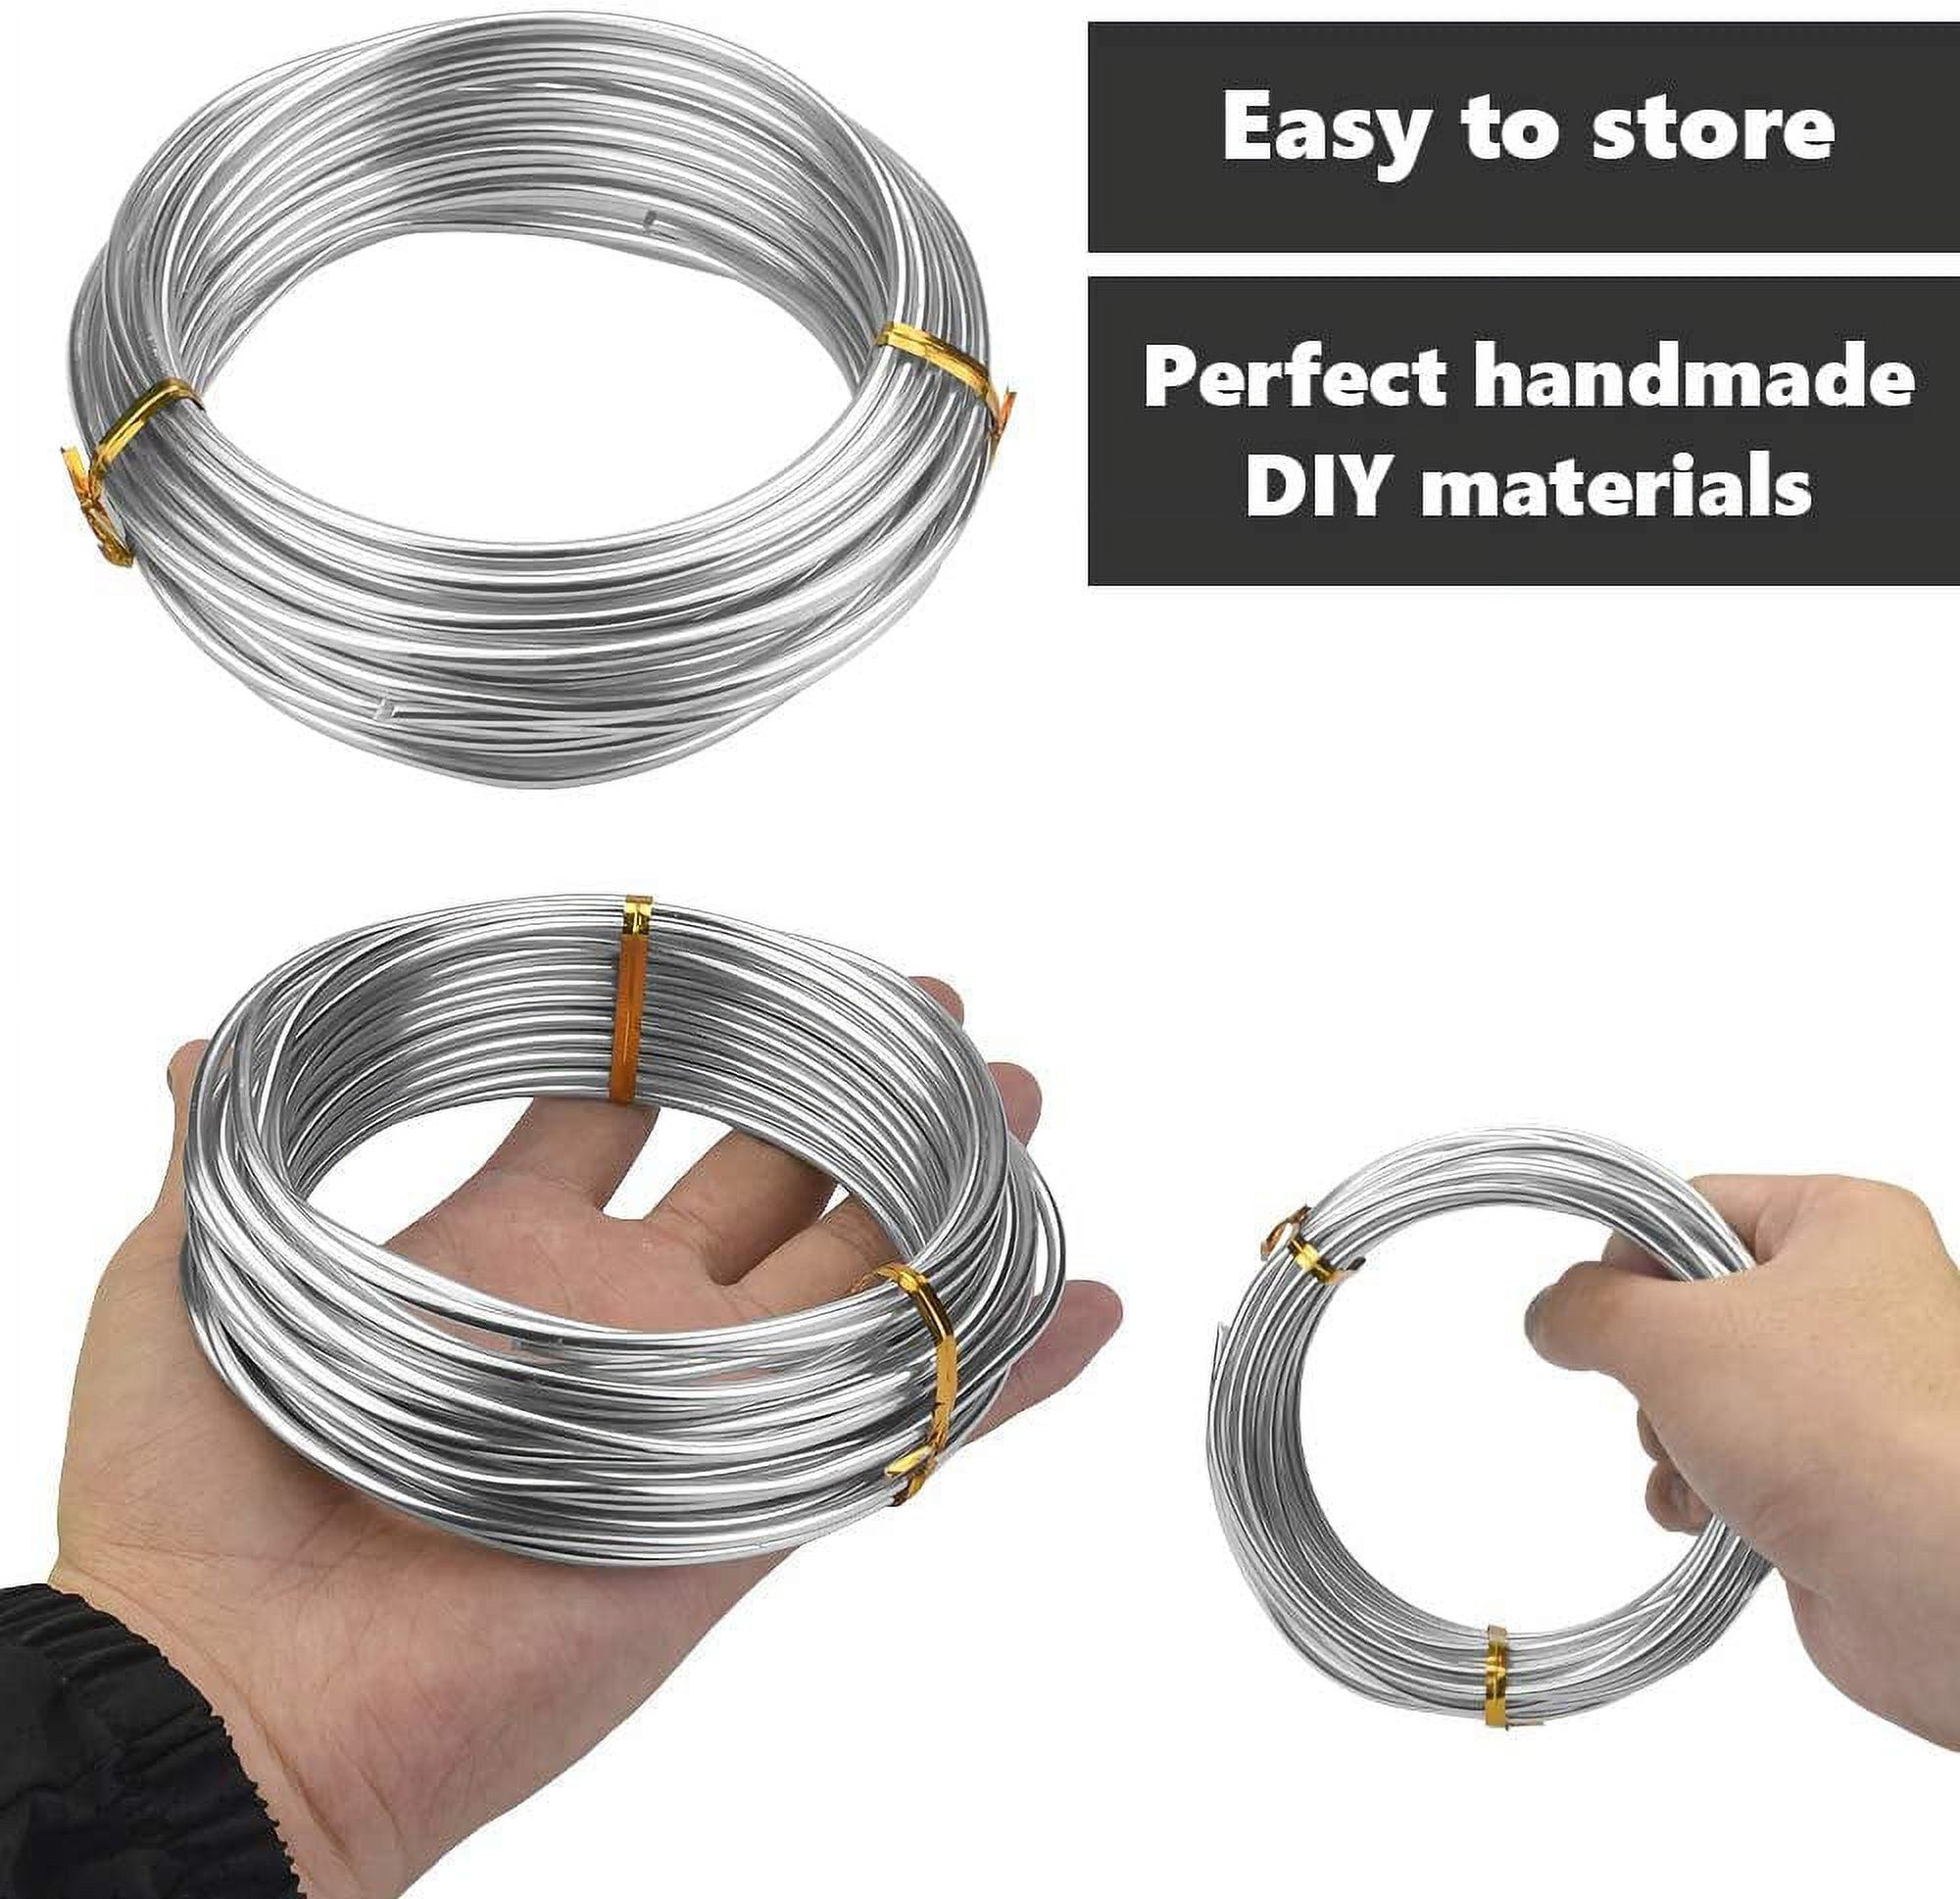 Silver Aluminum Wire Metal Craft Wire 3mm Diameter (9 Gauge) 10 M (32.8 Feet) Bendable and Flexible Floral Armature Wire for DIY Arts and Craft Pro